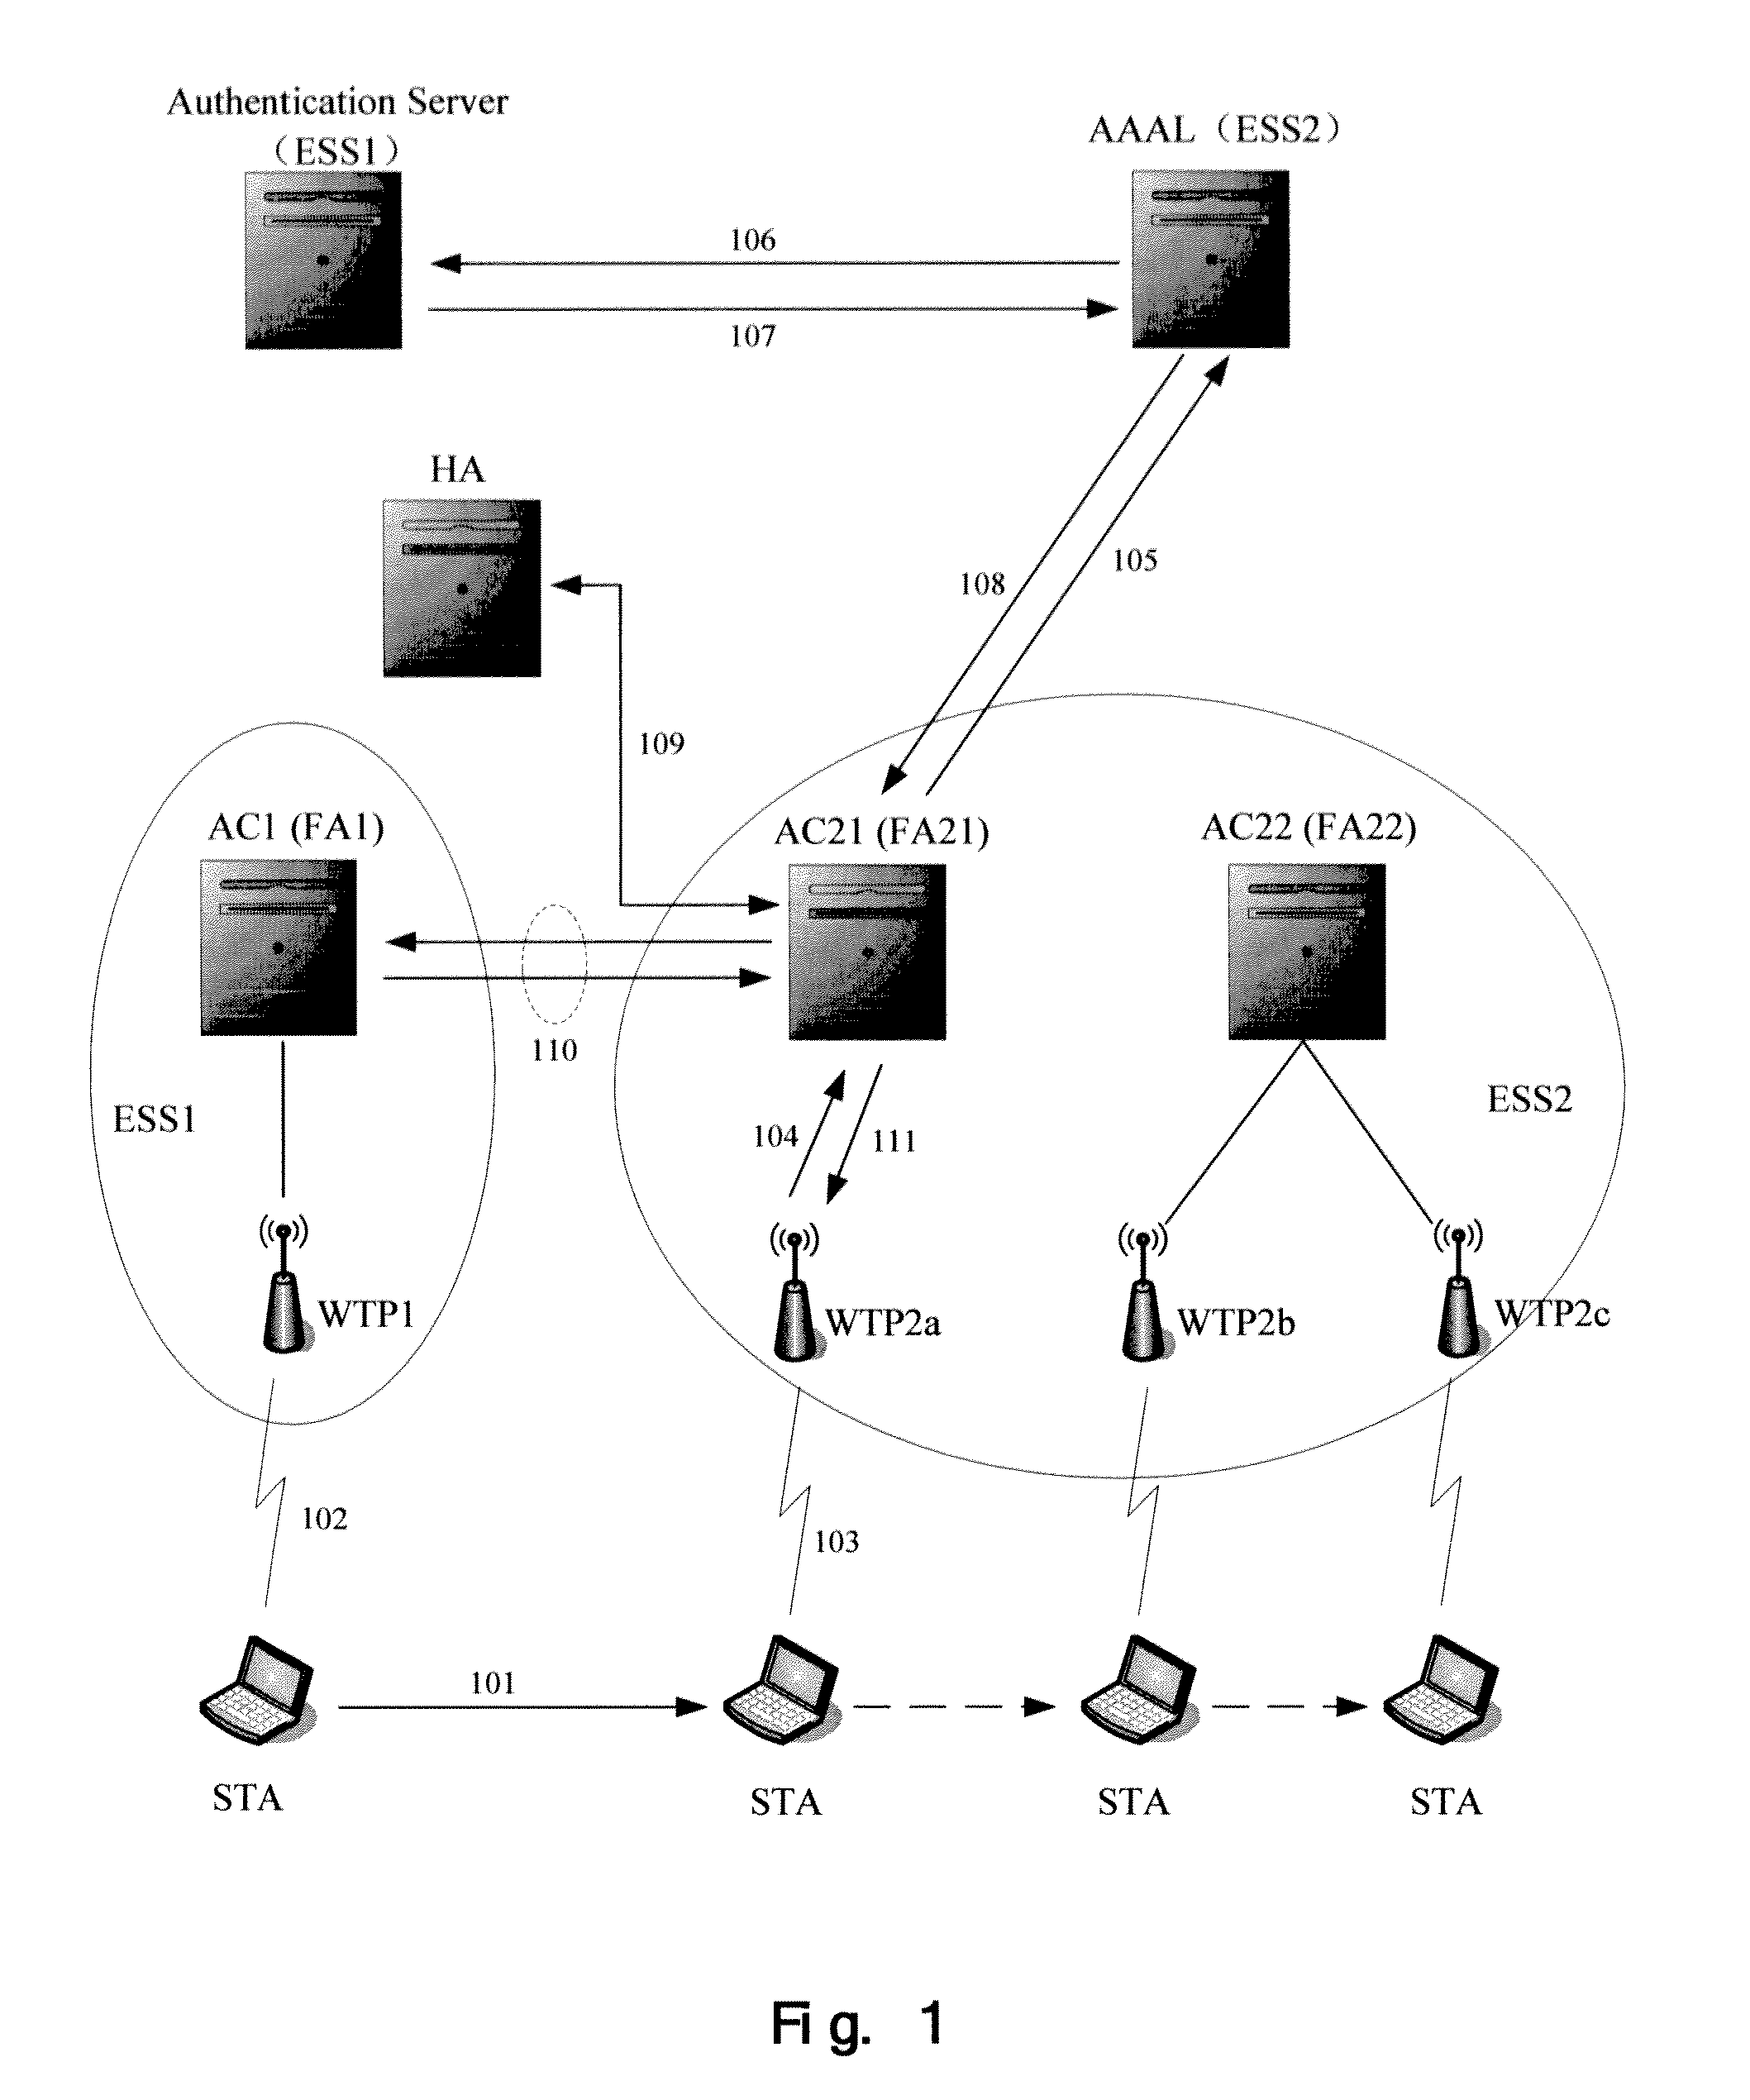 A roaming method for a mobile terminal in wlan, related access controller and access point device